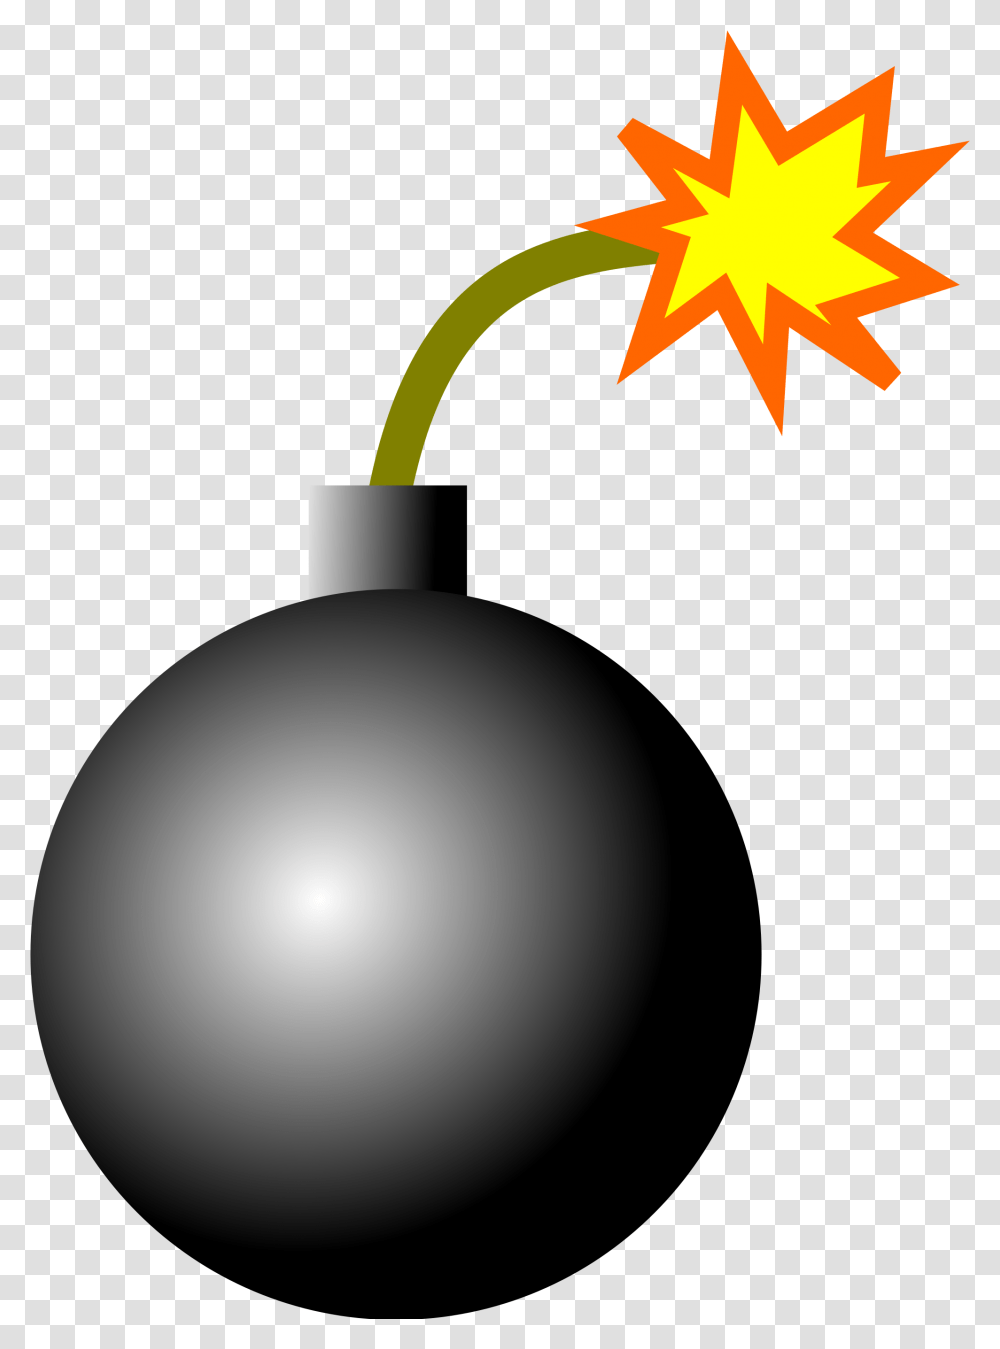 Explosion Clipart Grenade Background Bomb, Weapon, Weaponry, Lighting, Dynamite Transparent Png